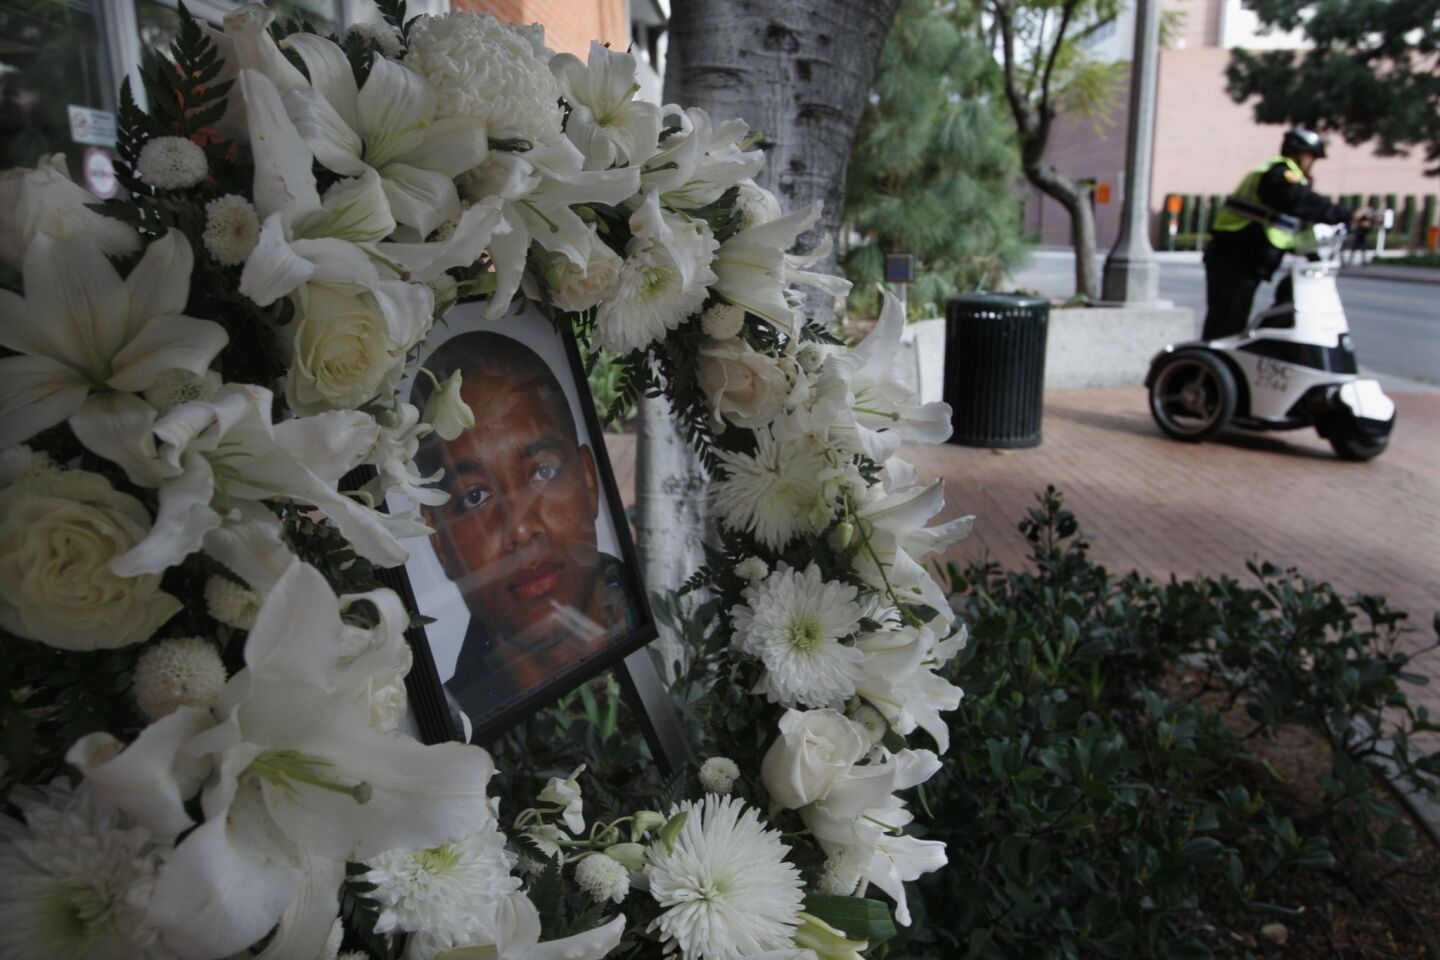 A memorial for USC Public Safety Officer Keith Lawrence is set up outside the Department of Public Safety on the USC campus Sunday.